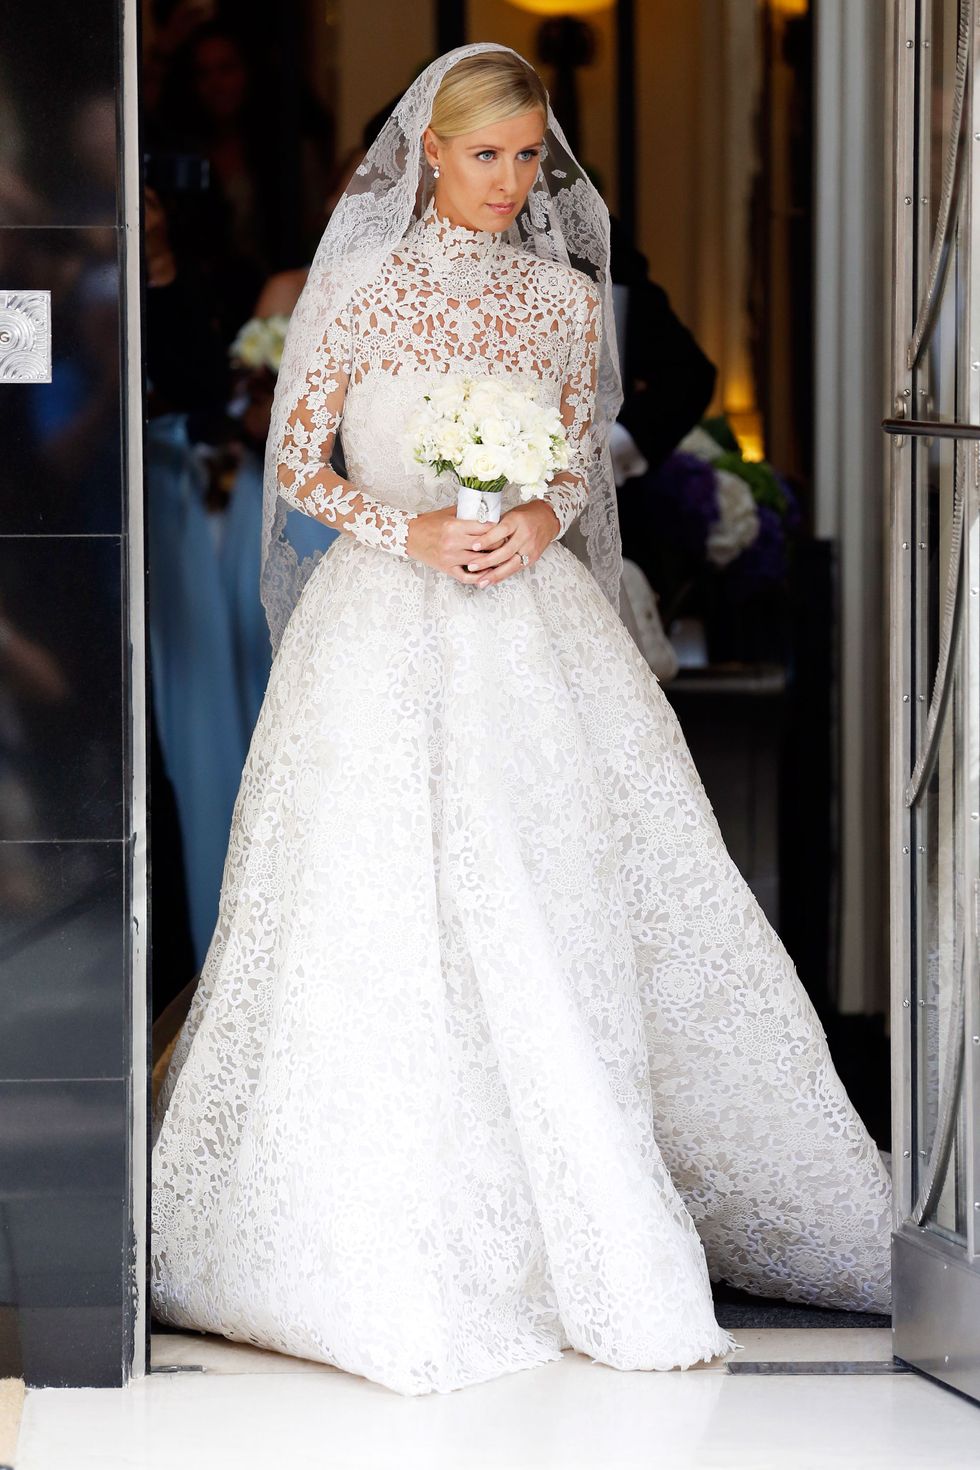 This Beautiful Bride Has Us Drooling Over Her Elegance & Style